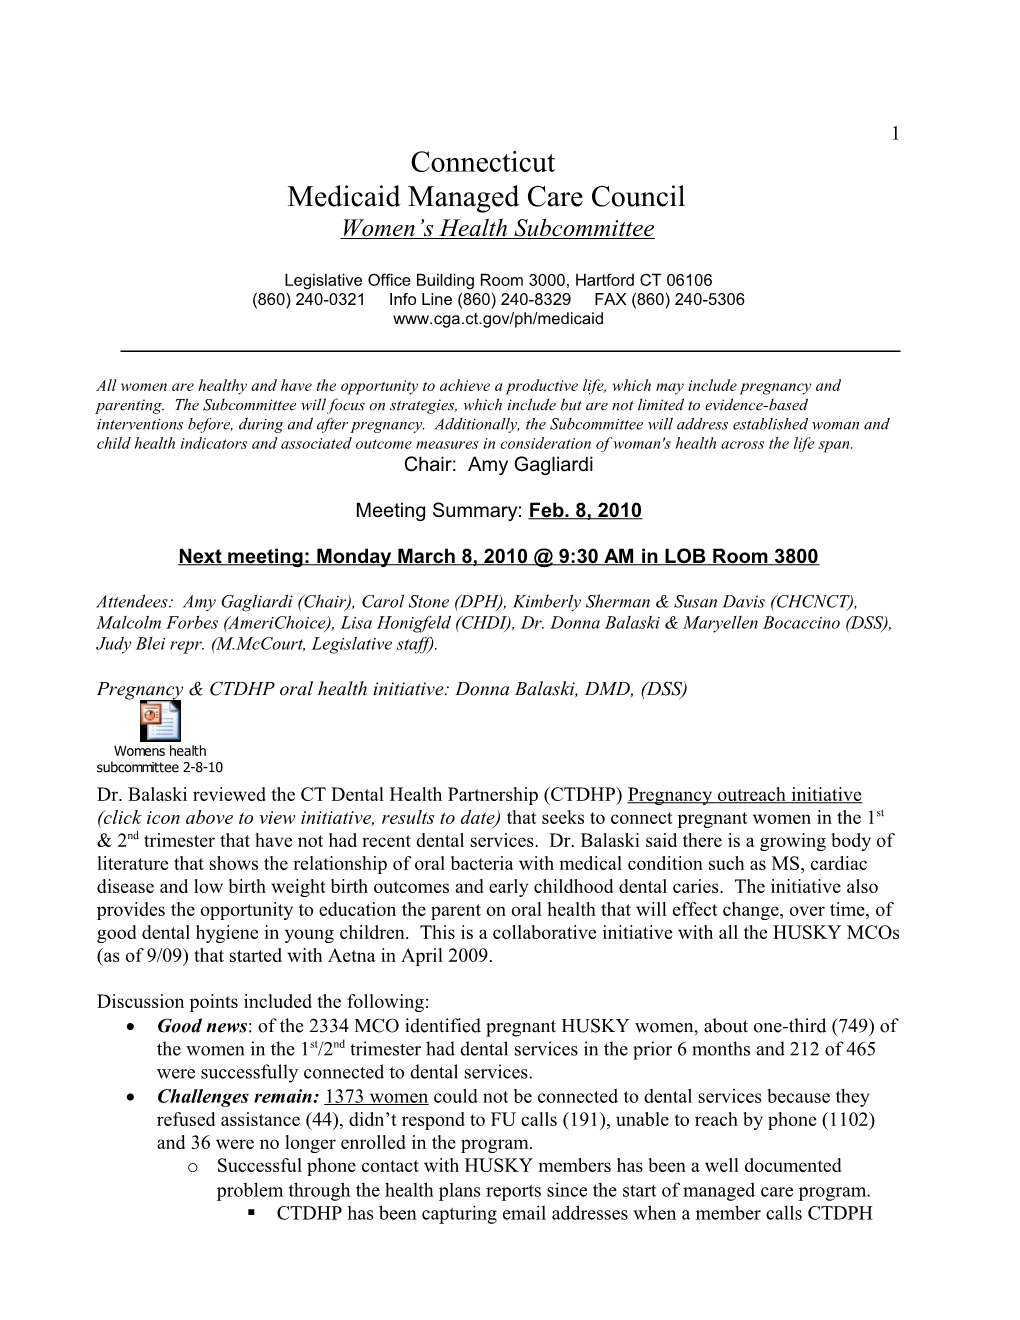 Medicaid Managed Care Council